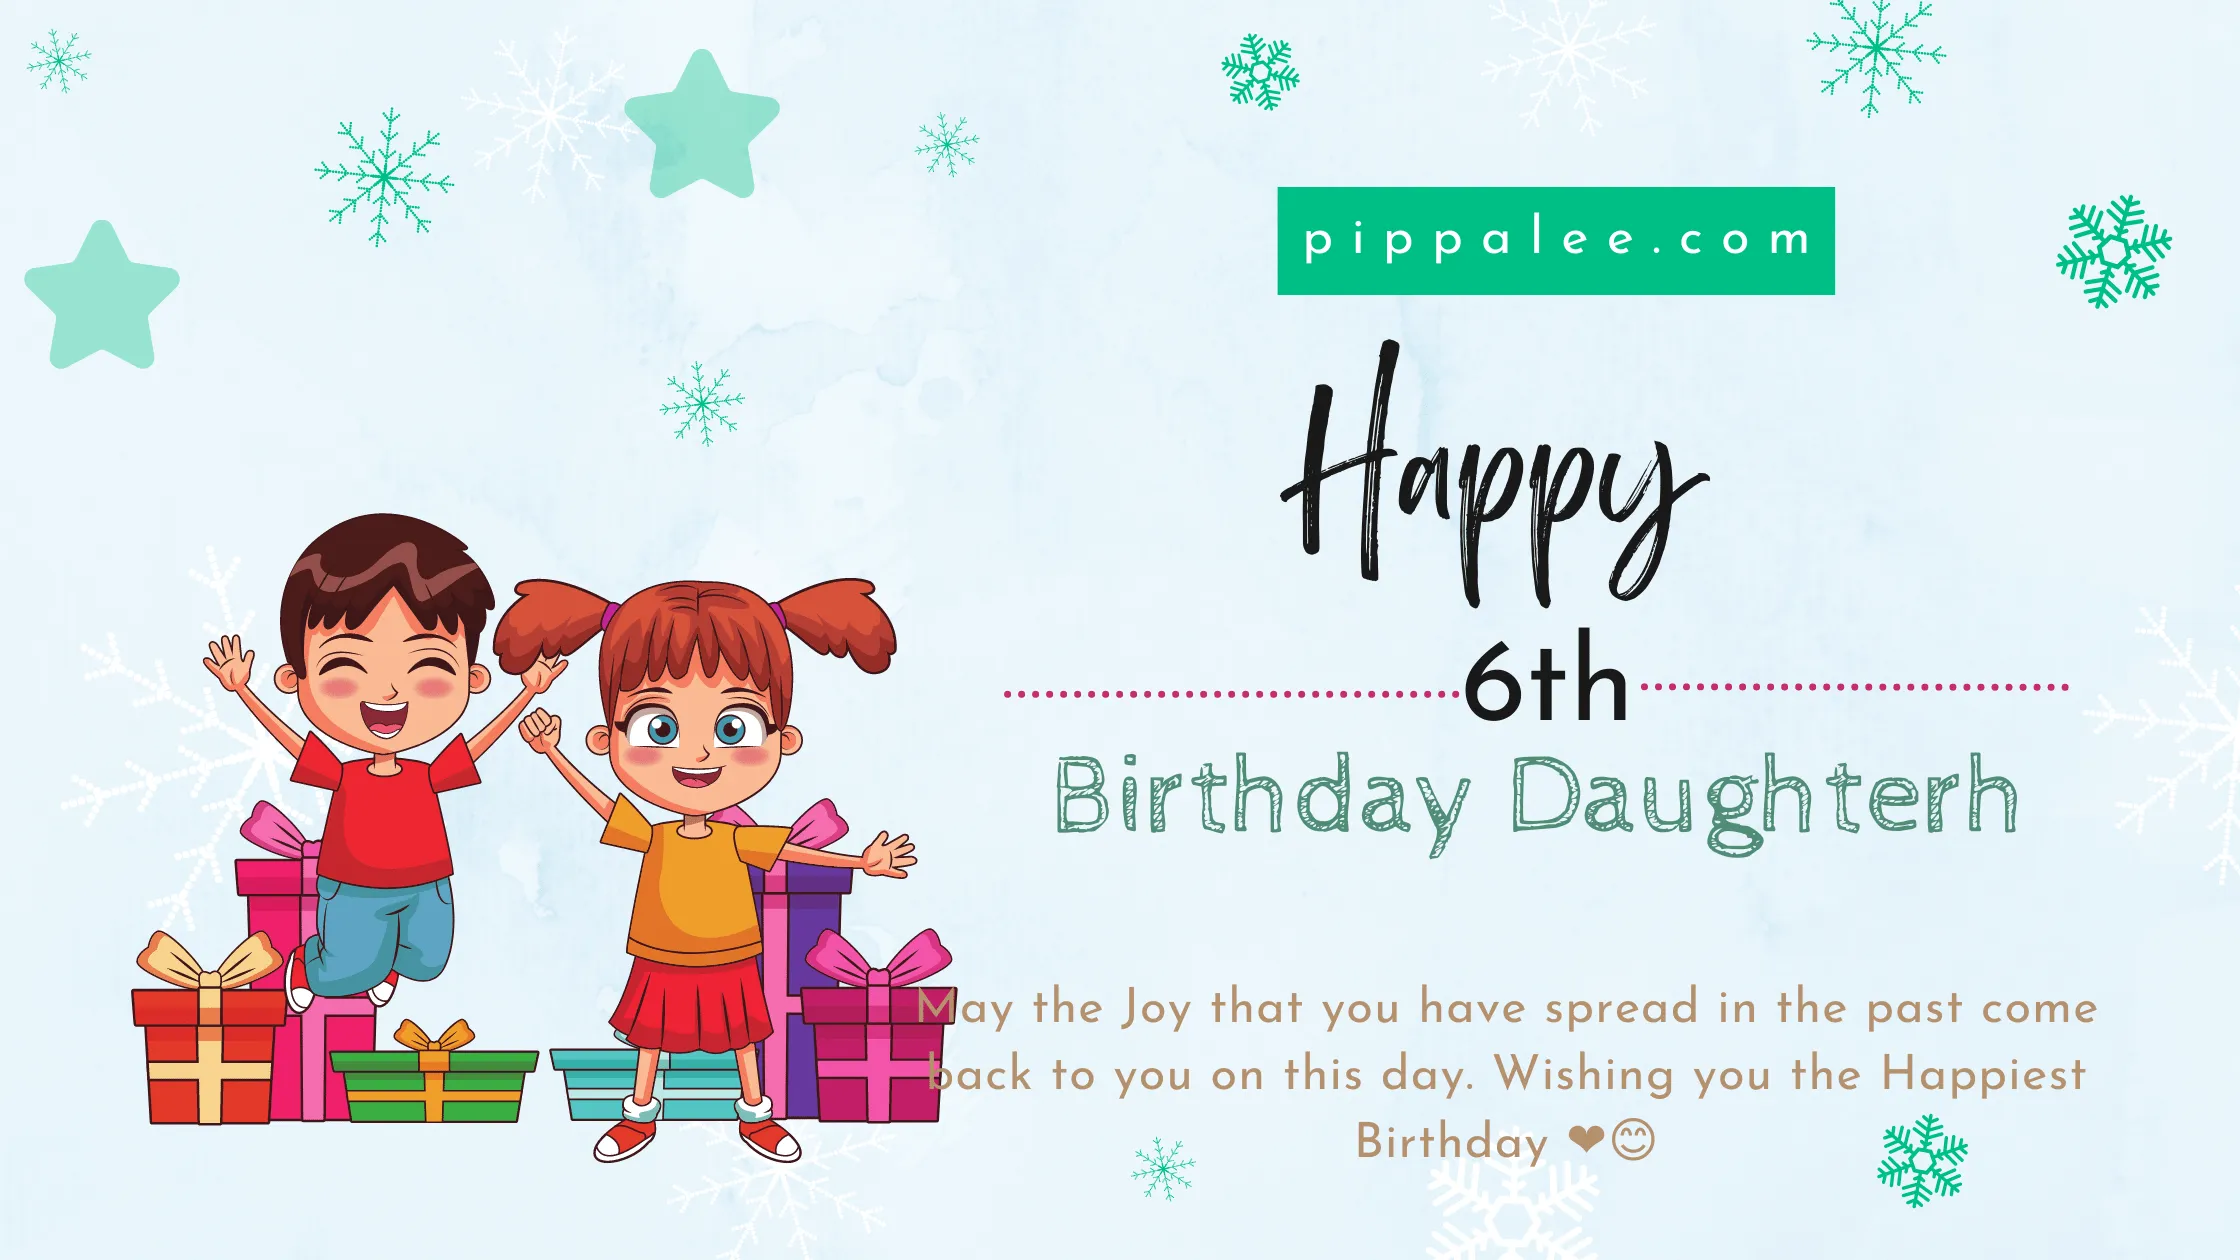 Happy 6th Birthday Daughter - Wishes & Messages